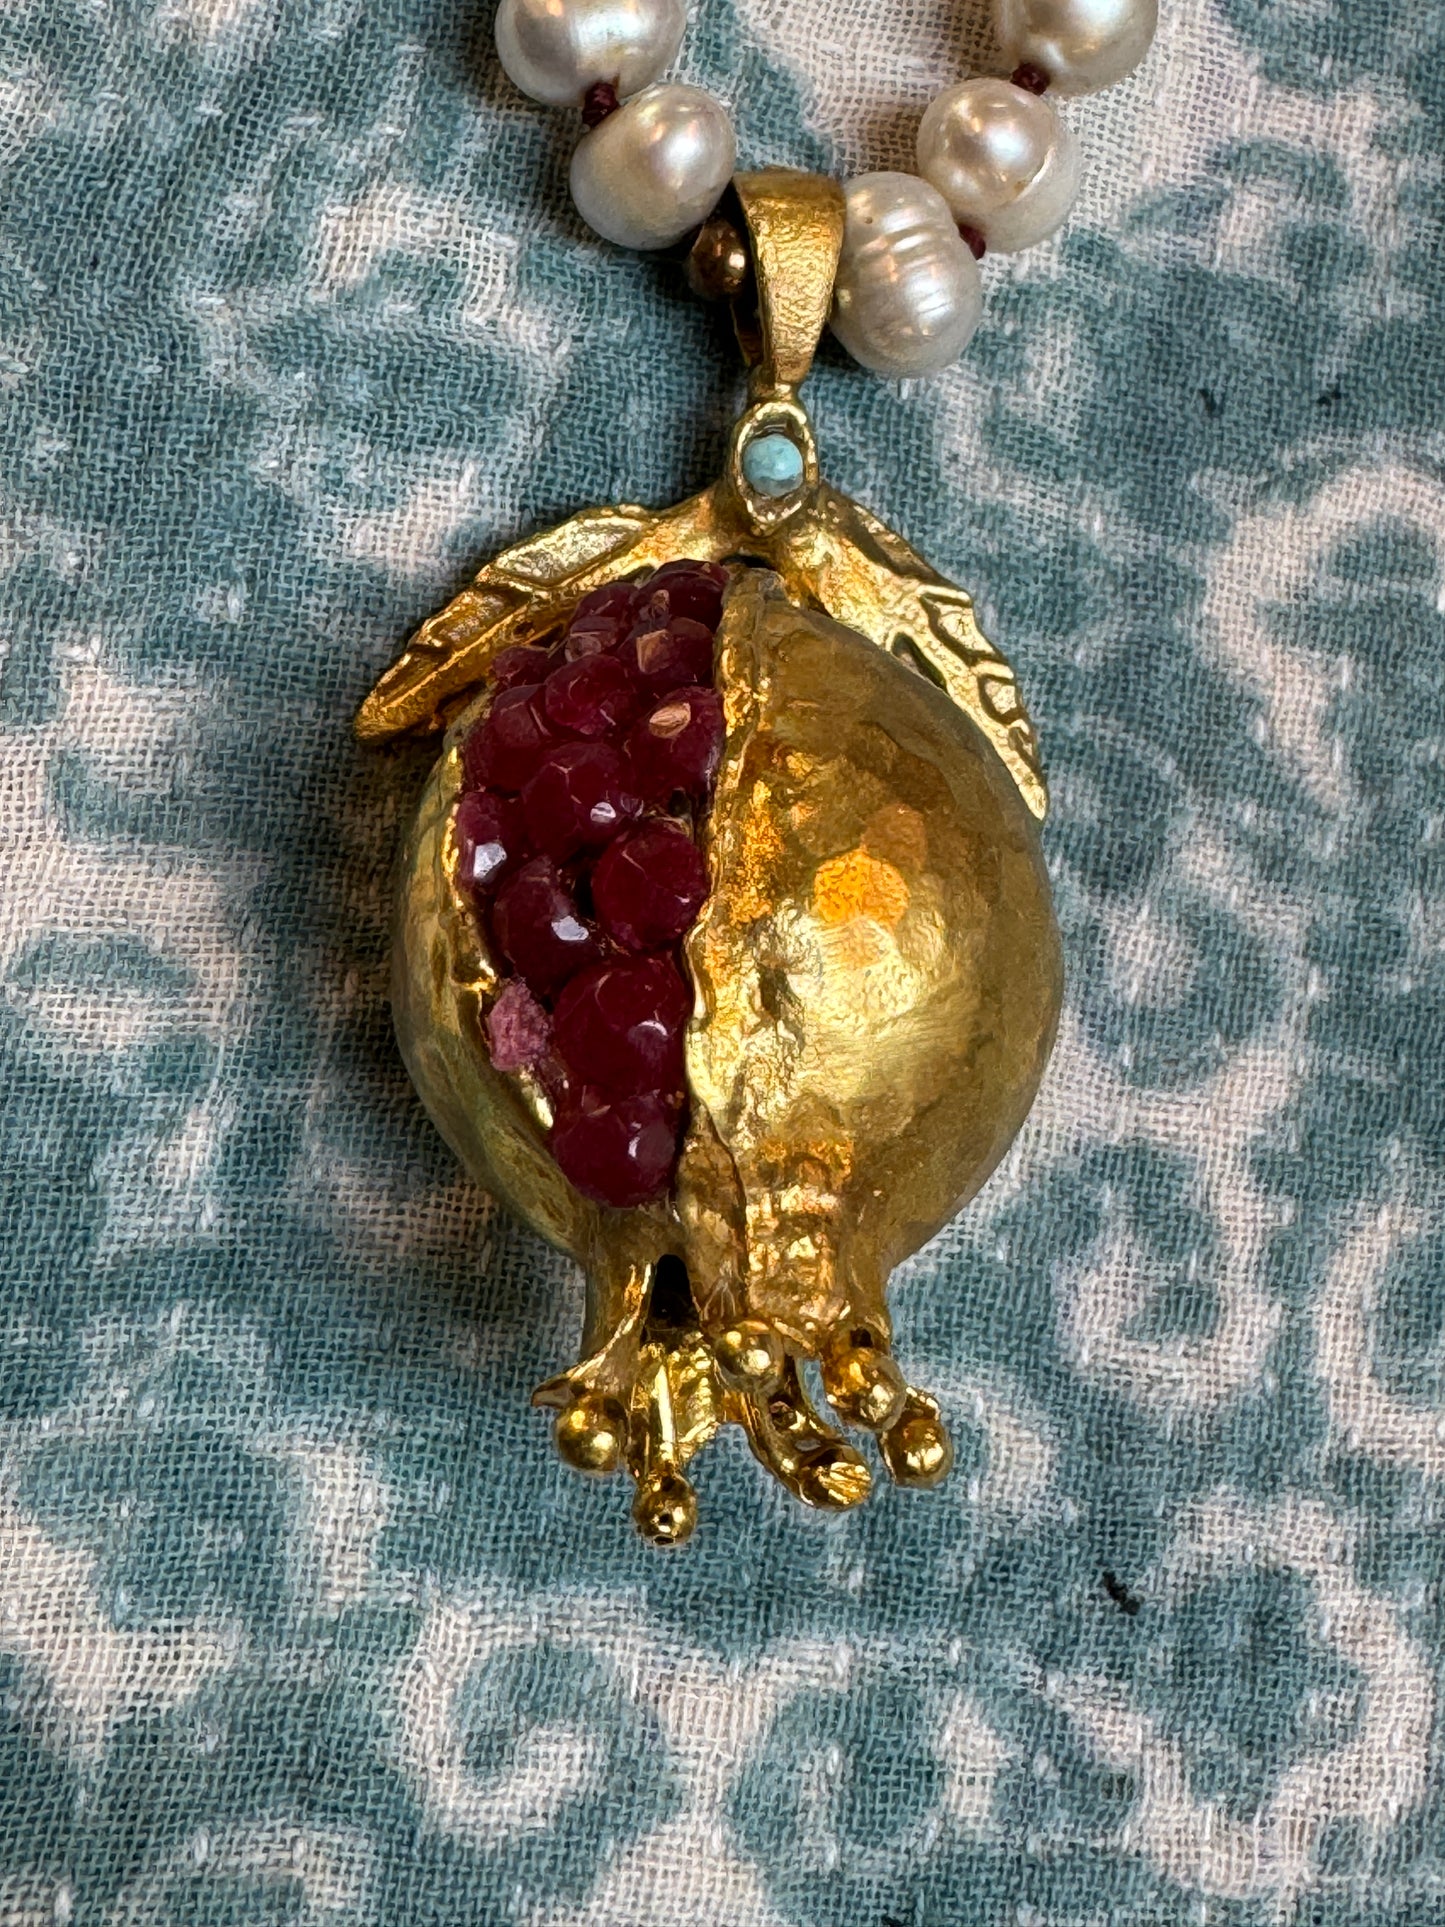 A POMEGRANATE & PEARL GARDEN OF NECKLACES, CUFFS, AND EARRINGS